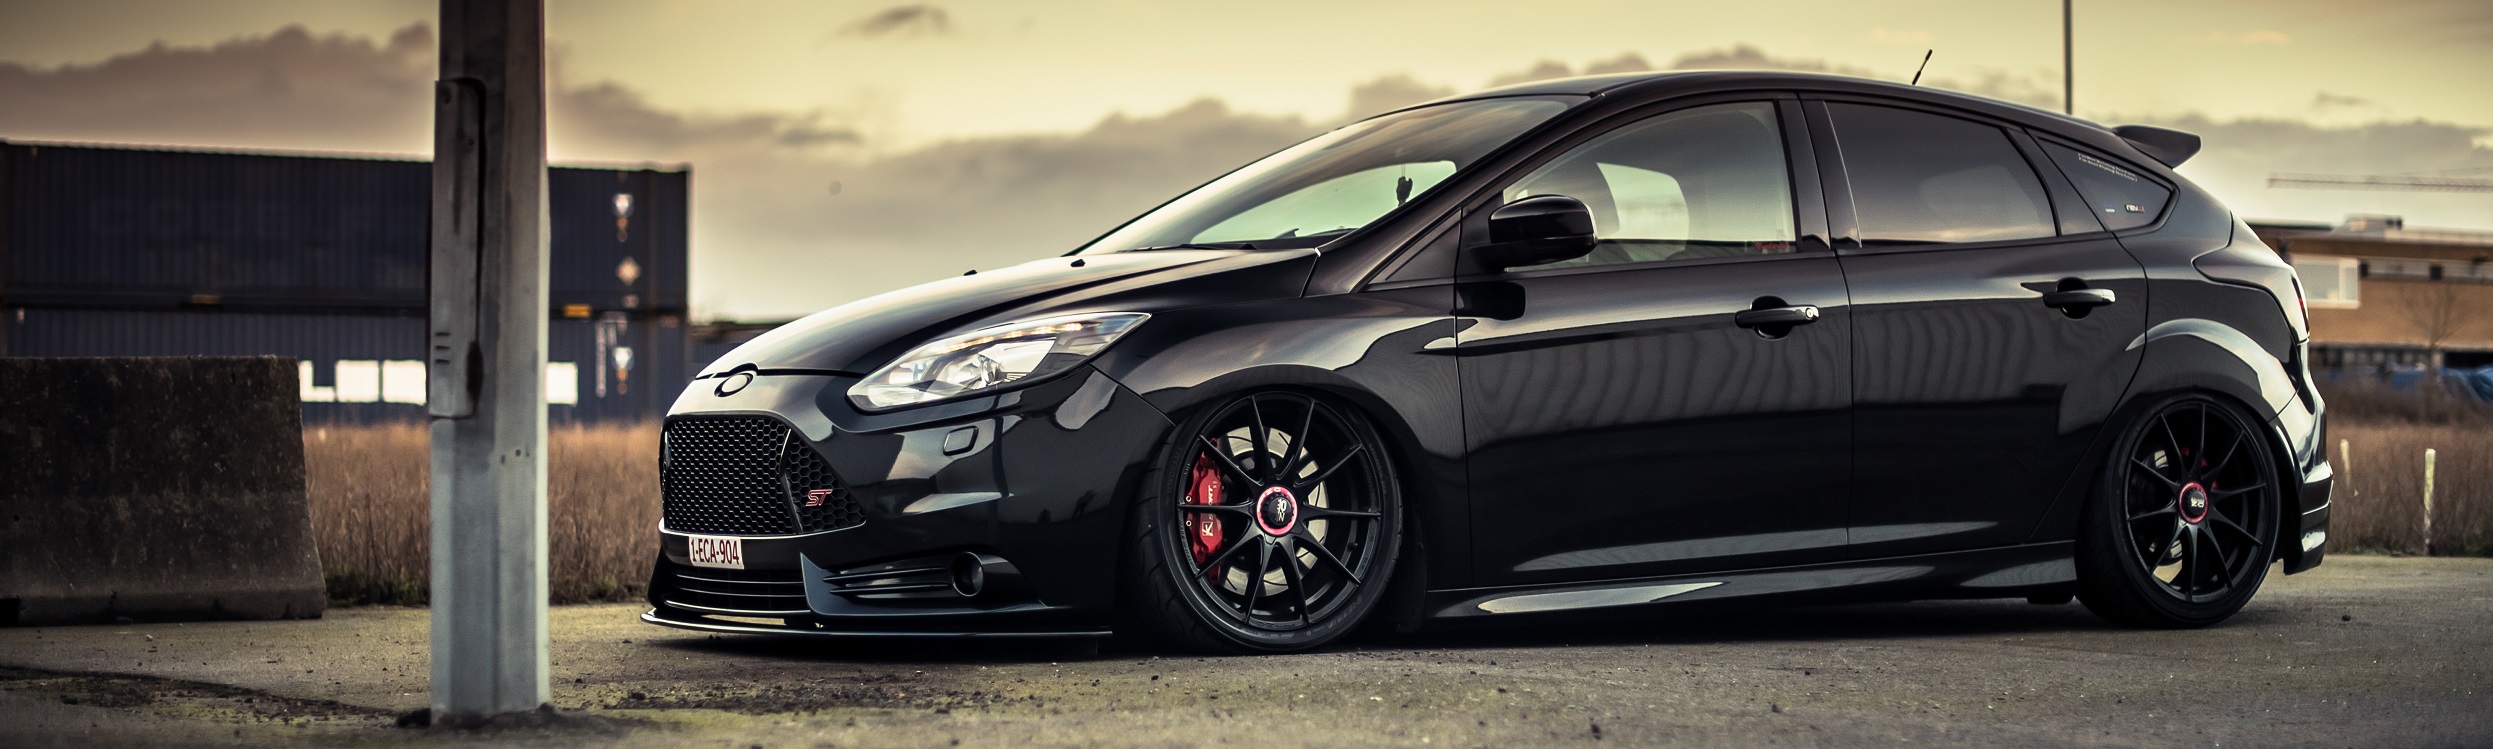 Ford Focus ST Mods and Aftermarket Performance Parts